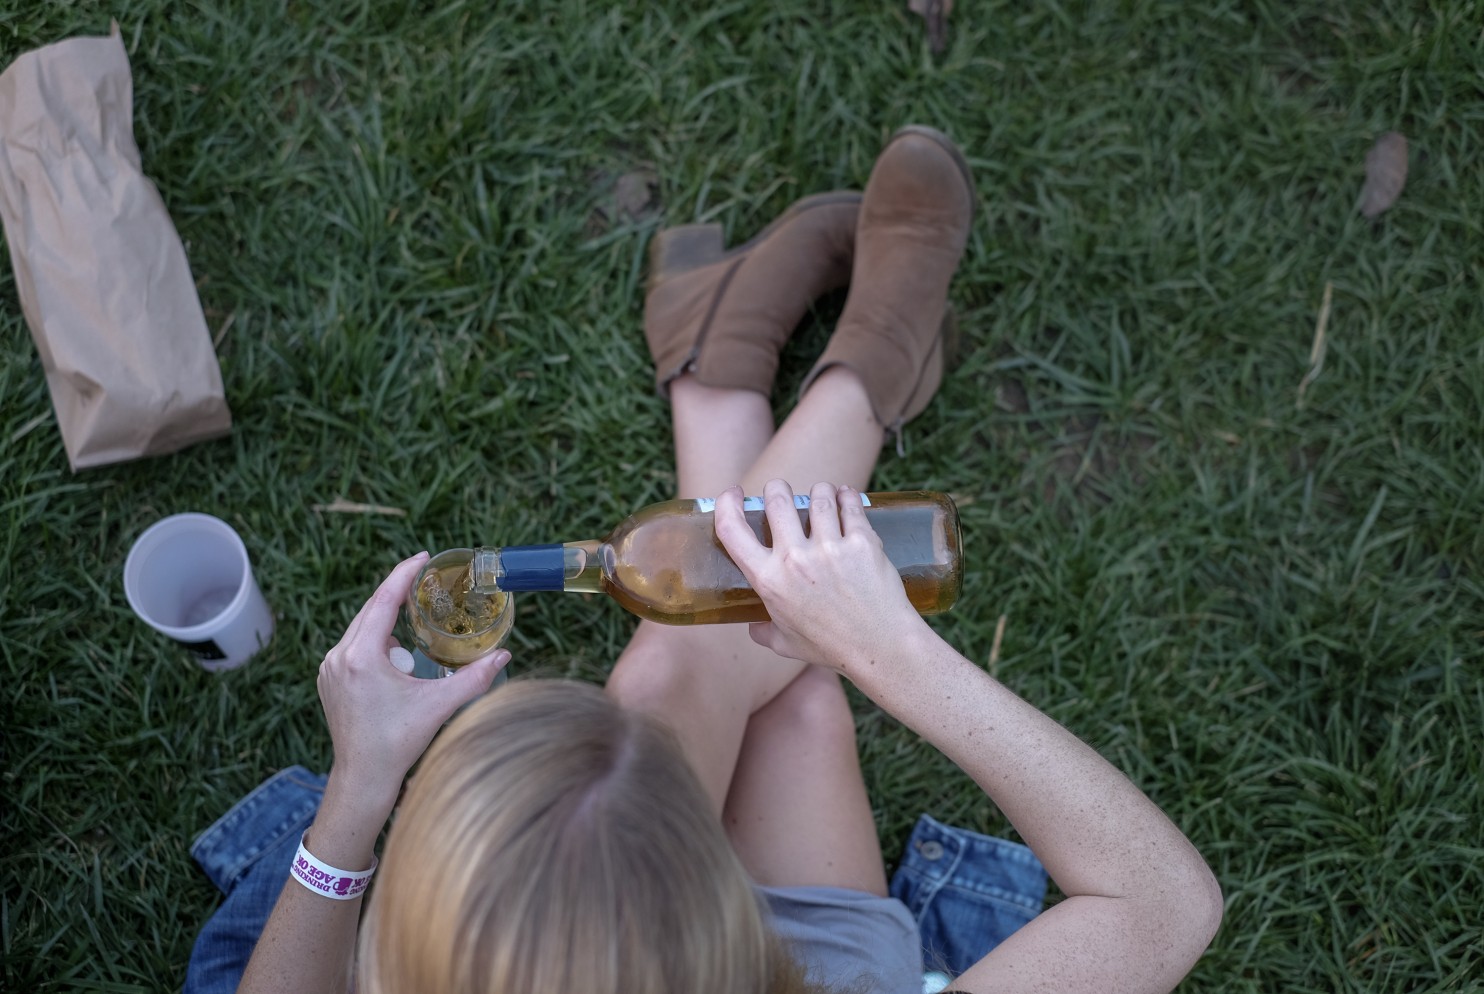 For women, heavy drinking has been normalized. That’s dangerous